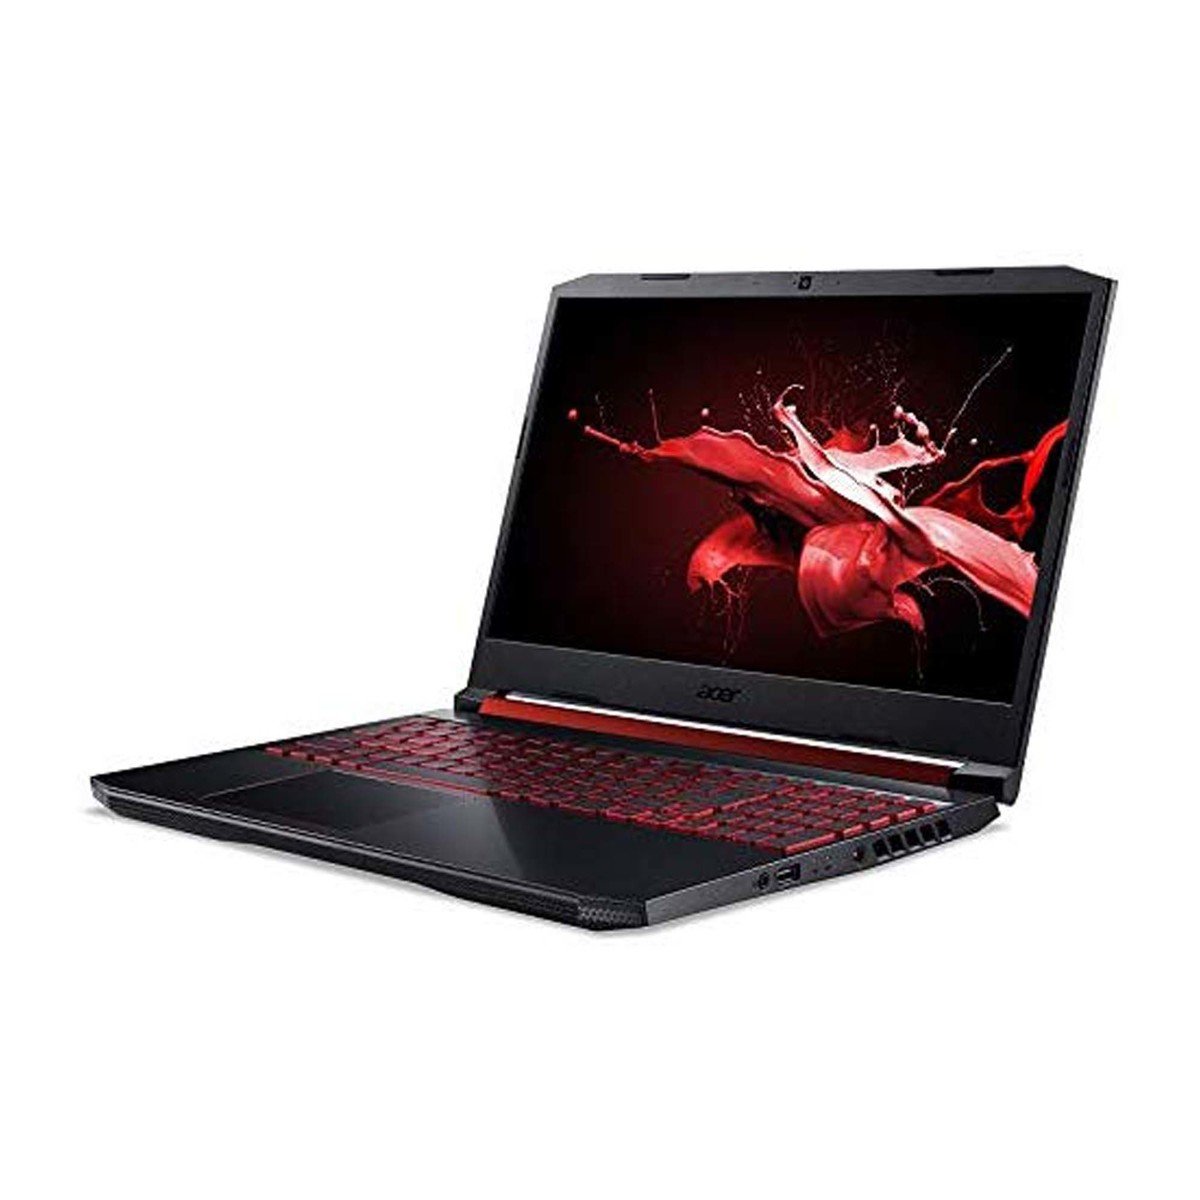 Acer Nitro 5-AN515-54-58BA Gaming Laptop Laptop-Intel Core i5-8300H/8GB DDR4 /1TB SSD/4GB GDDR5-8Gpbs NVIDIA GeForce GTX 1650/15.6" FHD Acer ComfyView IPS LED LCD/Win 10 Home/Black